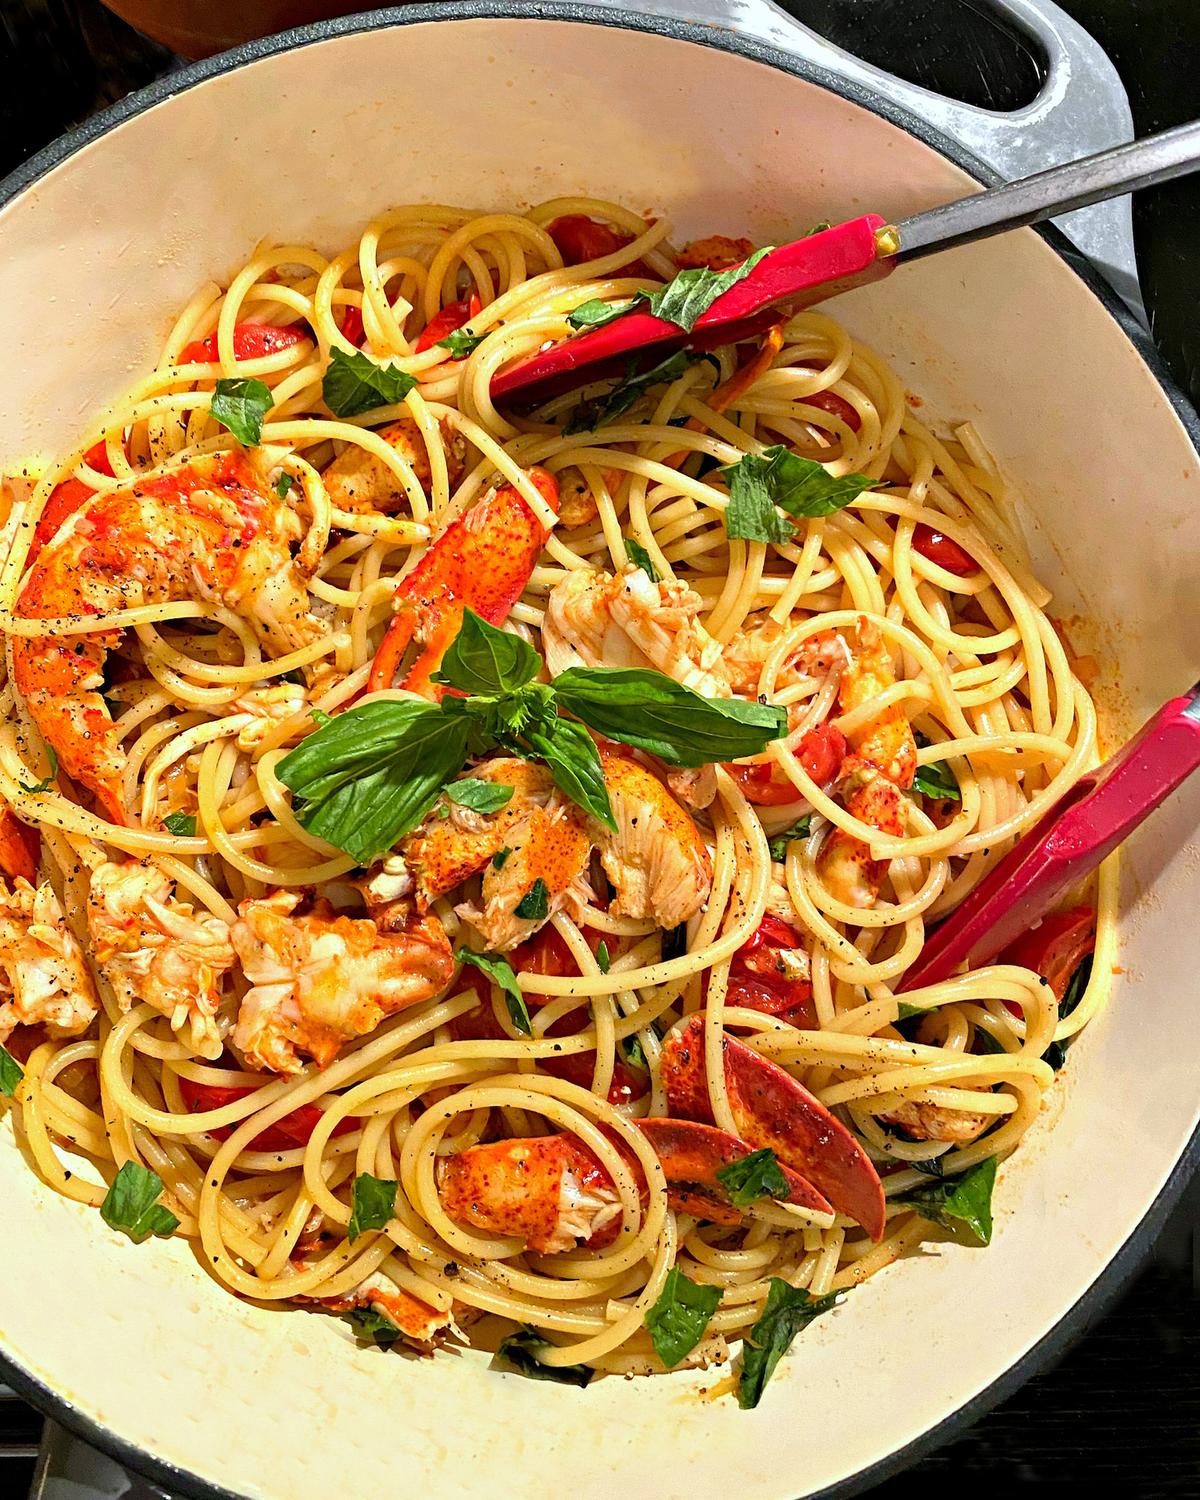 This simple yet elegant pasta dish allows the lobster to shine. (Lynda Balslev for Tastefood)